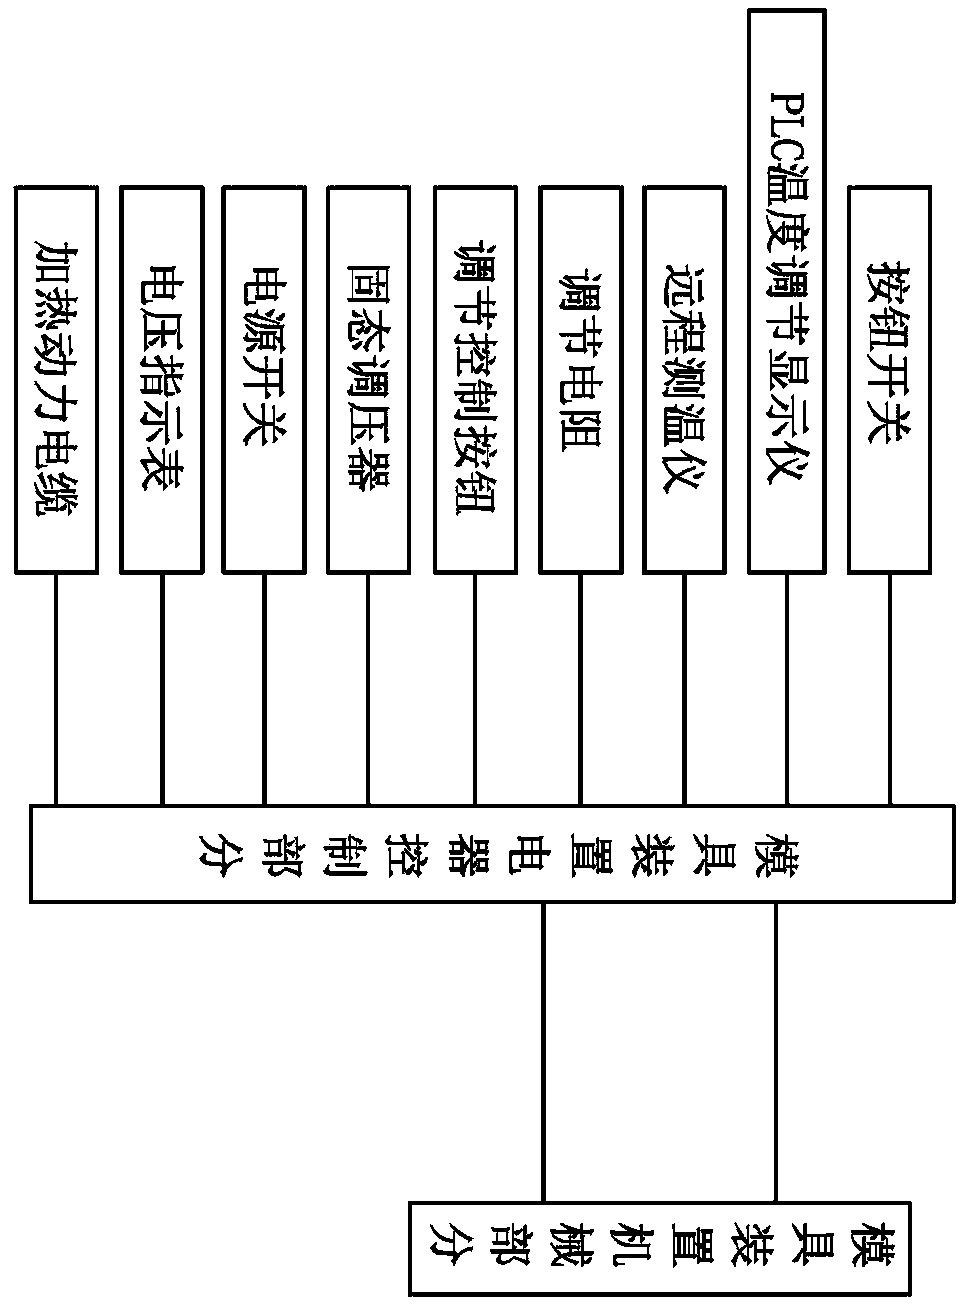 Temperature automatic regulating and controlling device for short-cut resin-based fiber reinforced plastic prepreg forming process